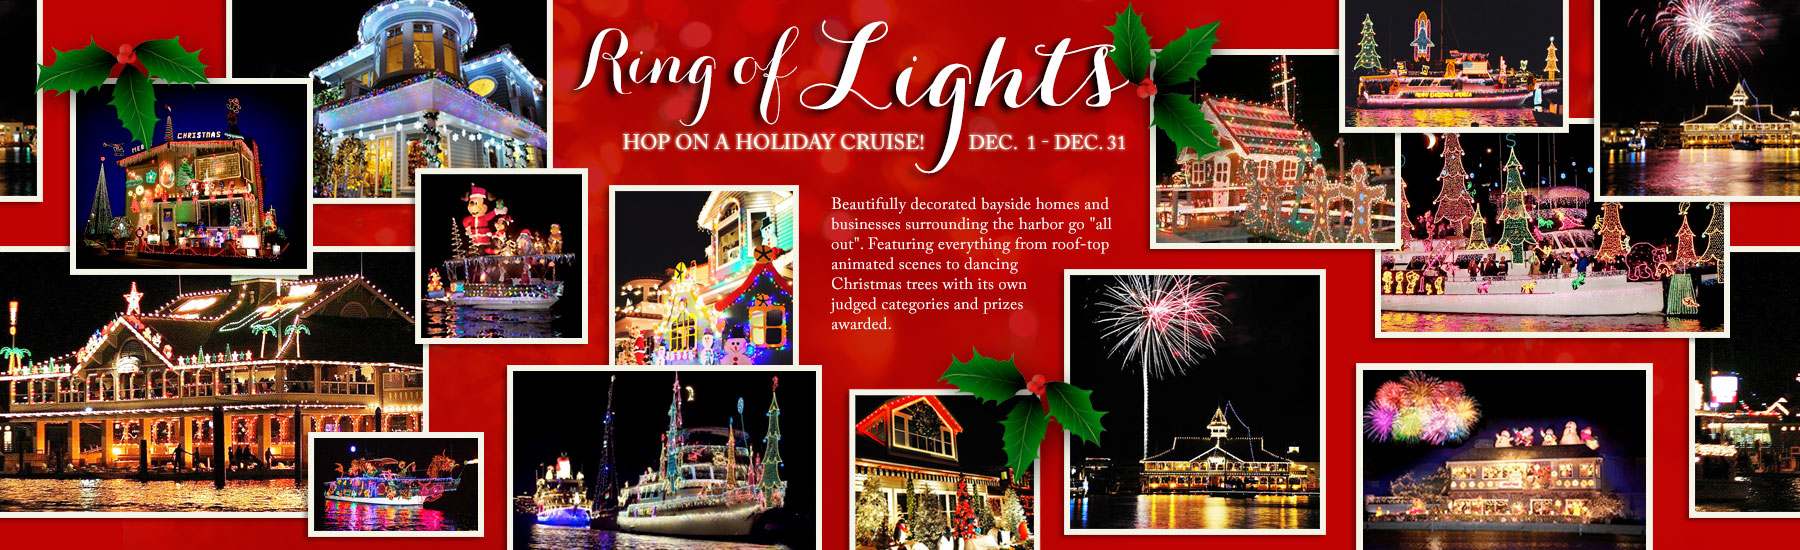 Christmas Boat Parade 2018 Cruise Reservation Newport Beach